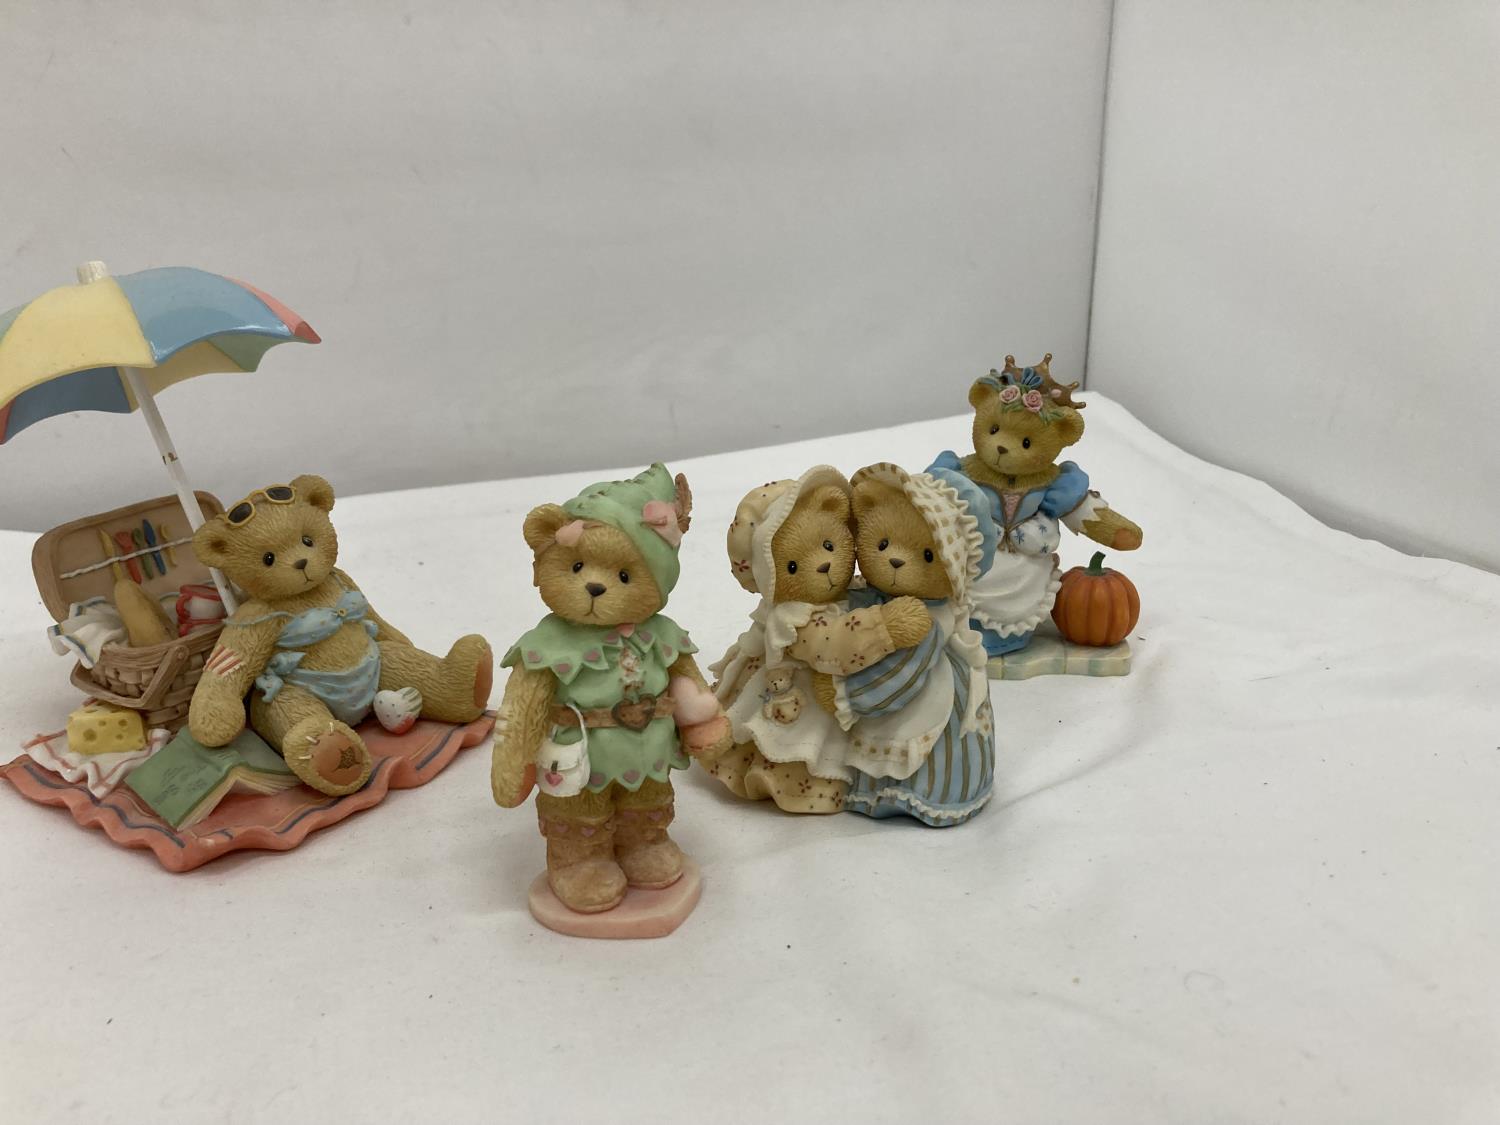 FOUR LIMITED EDITION CHERISHED TEDDIES, 'CHRISTINA', 'ROBIN', 'HALEY AND LOGAN', AND 'JUDY' - Image 2 of 12